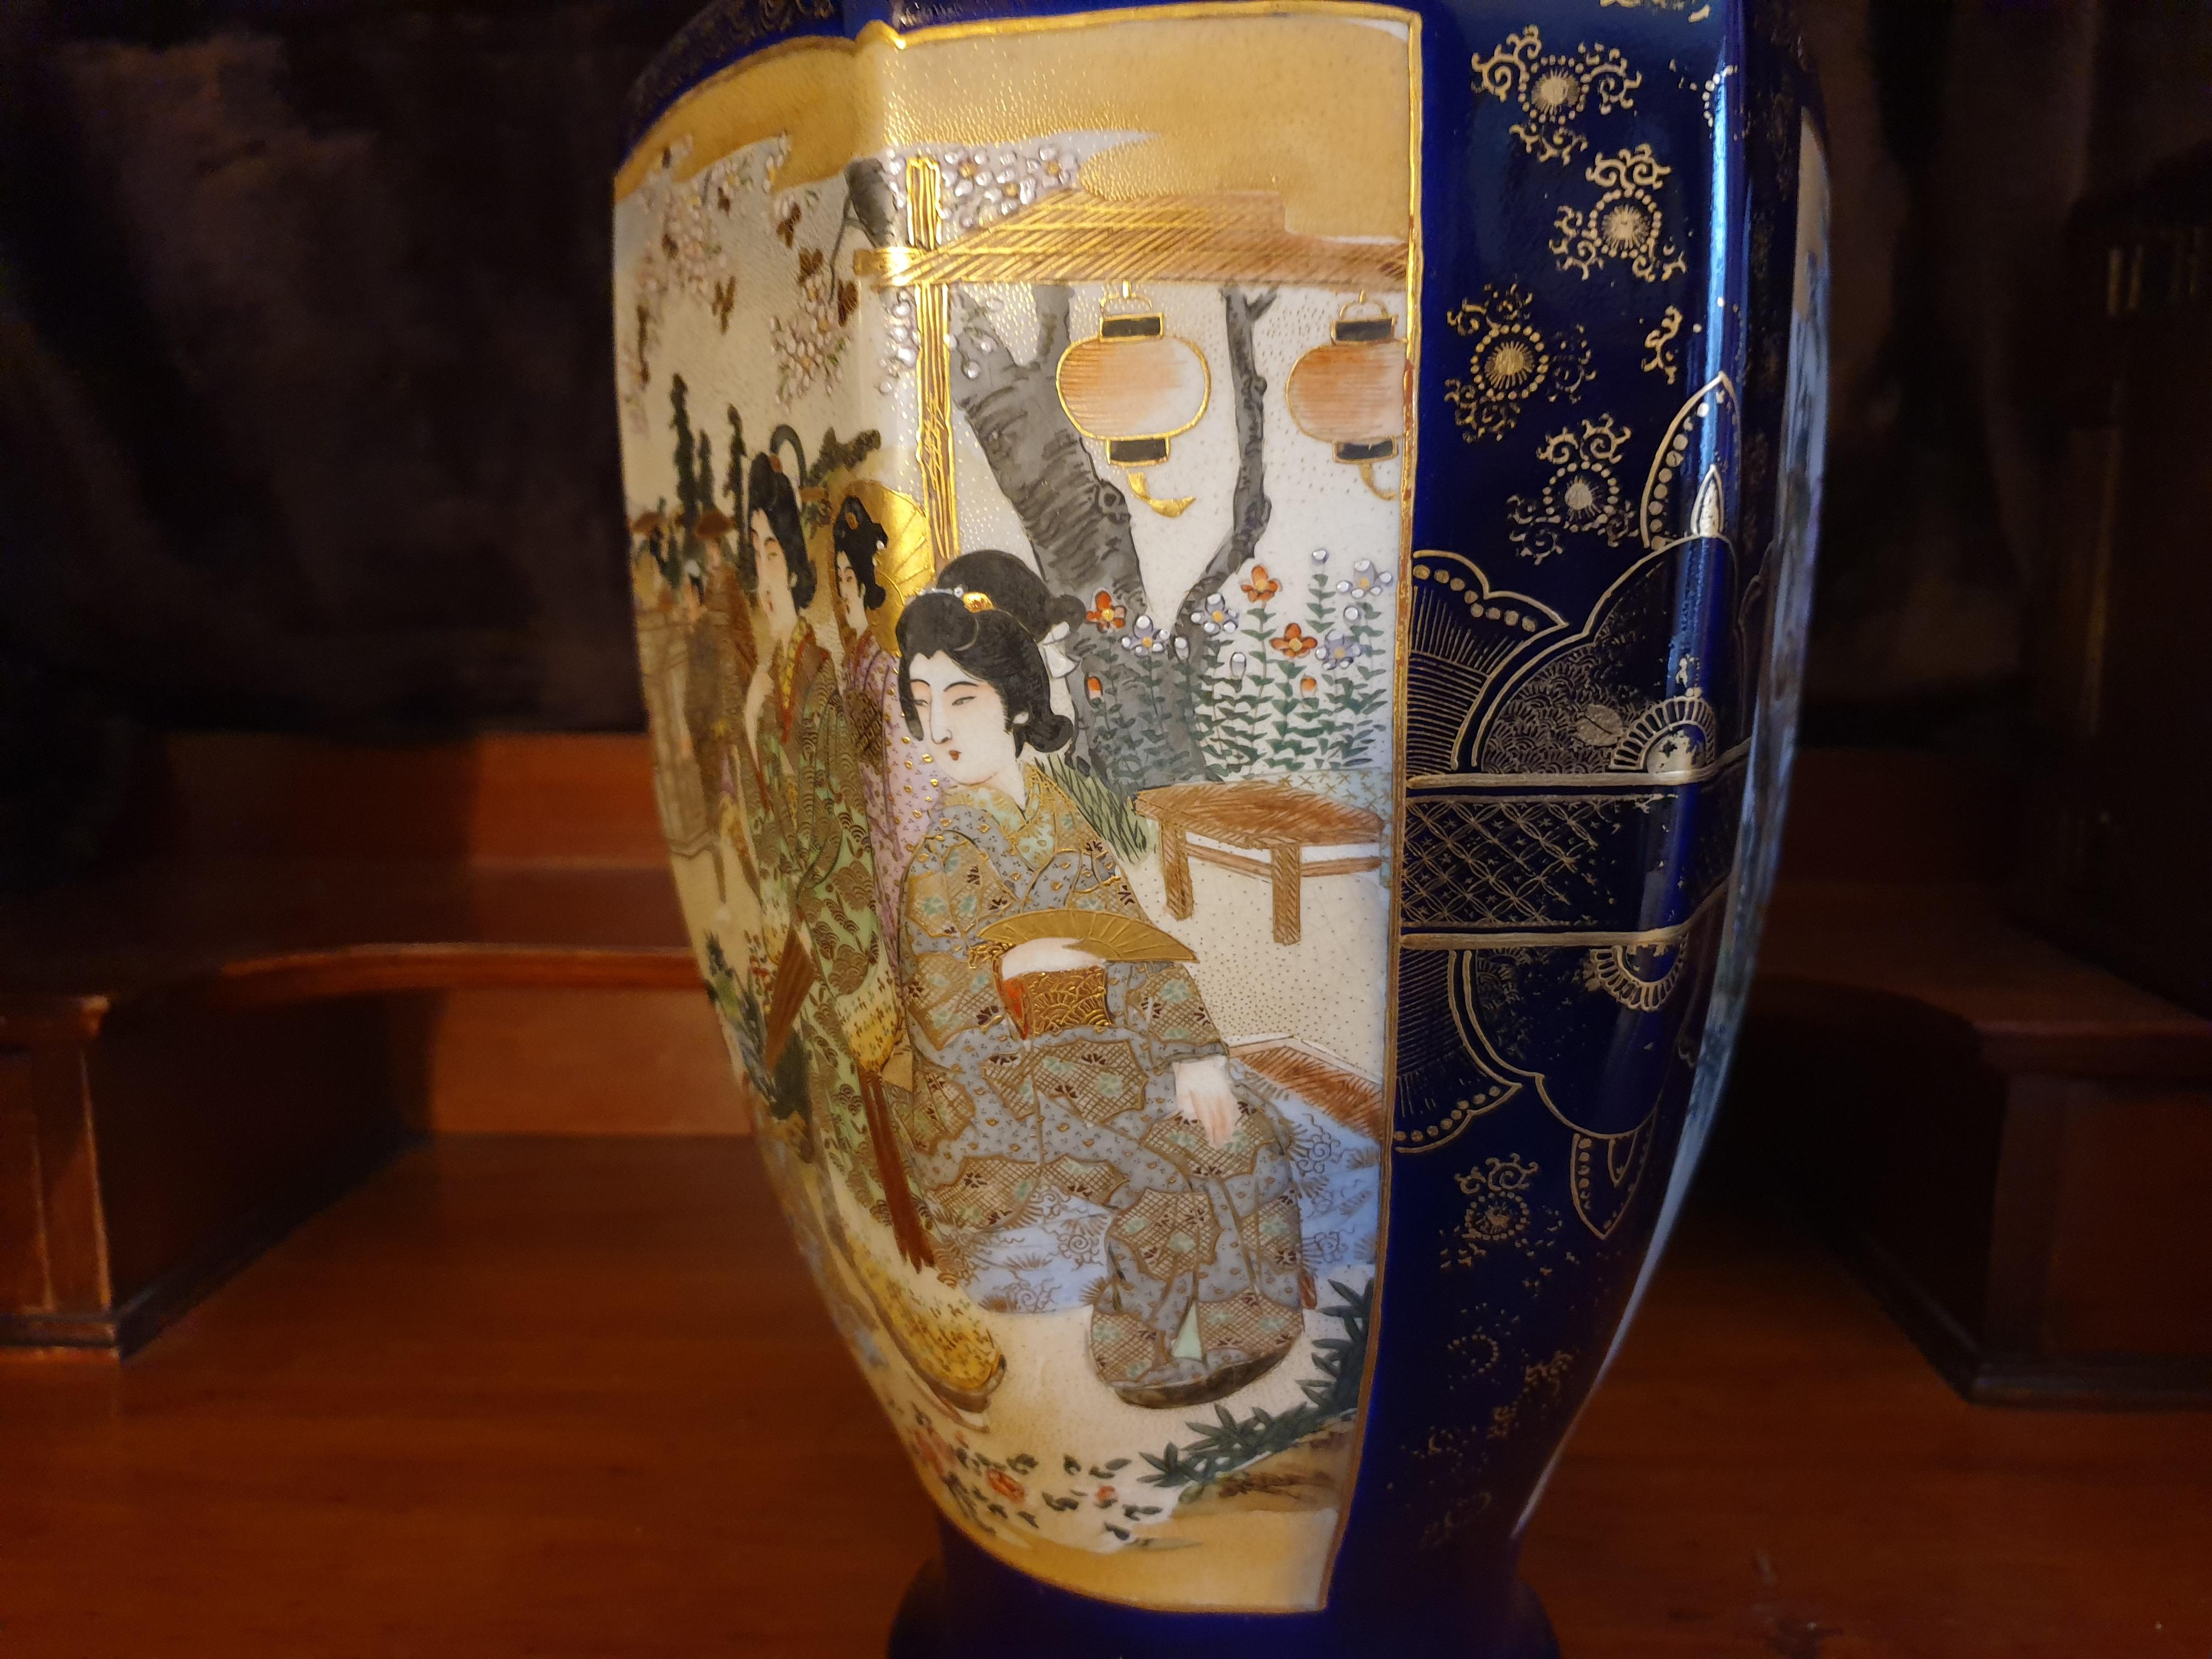 Meiji Period Pair of Japanese Satsuma Vases 19th Century With Imperial Scenes  For Sale 7